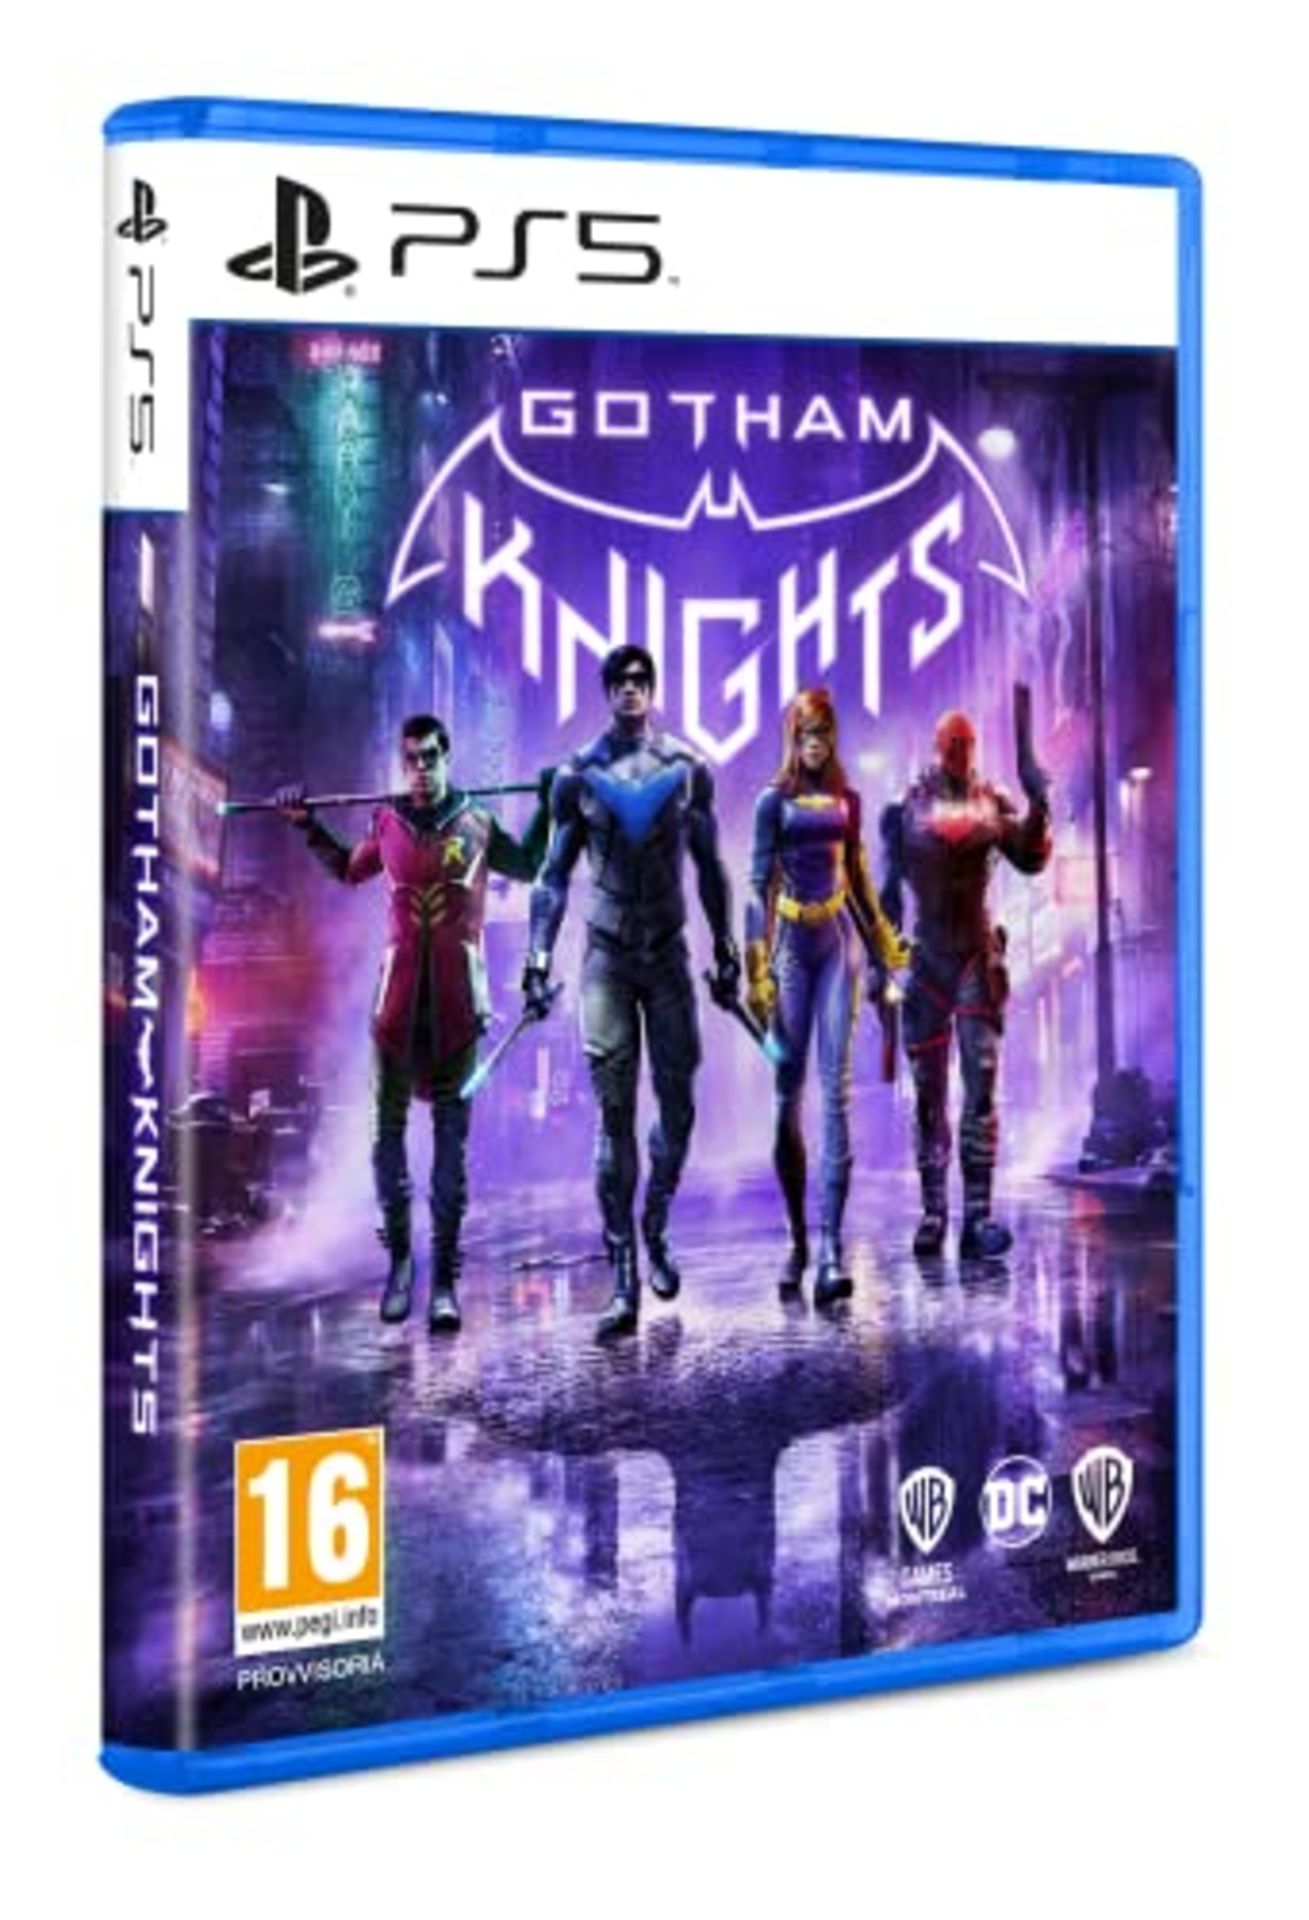 Gotham Knights is a video game available on the PlayStation 5.